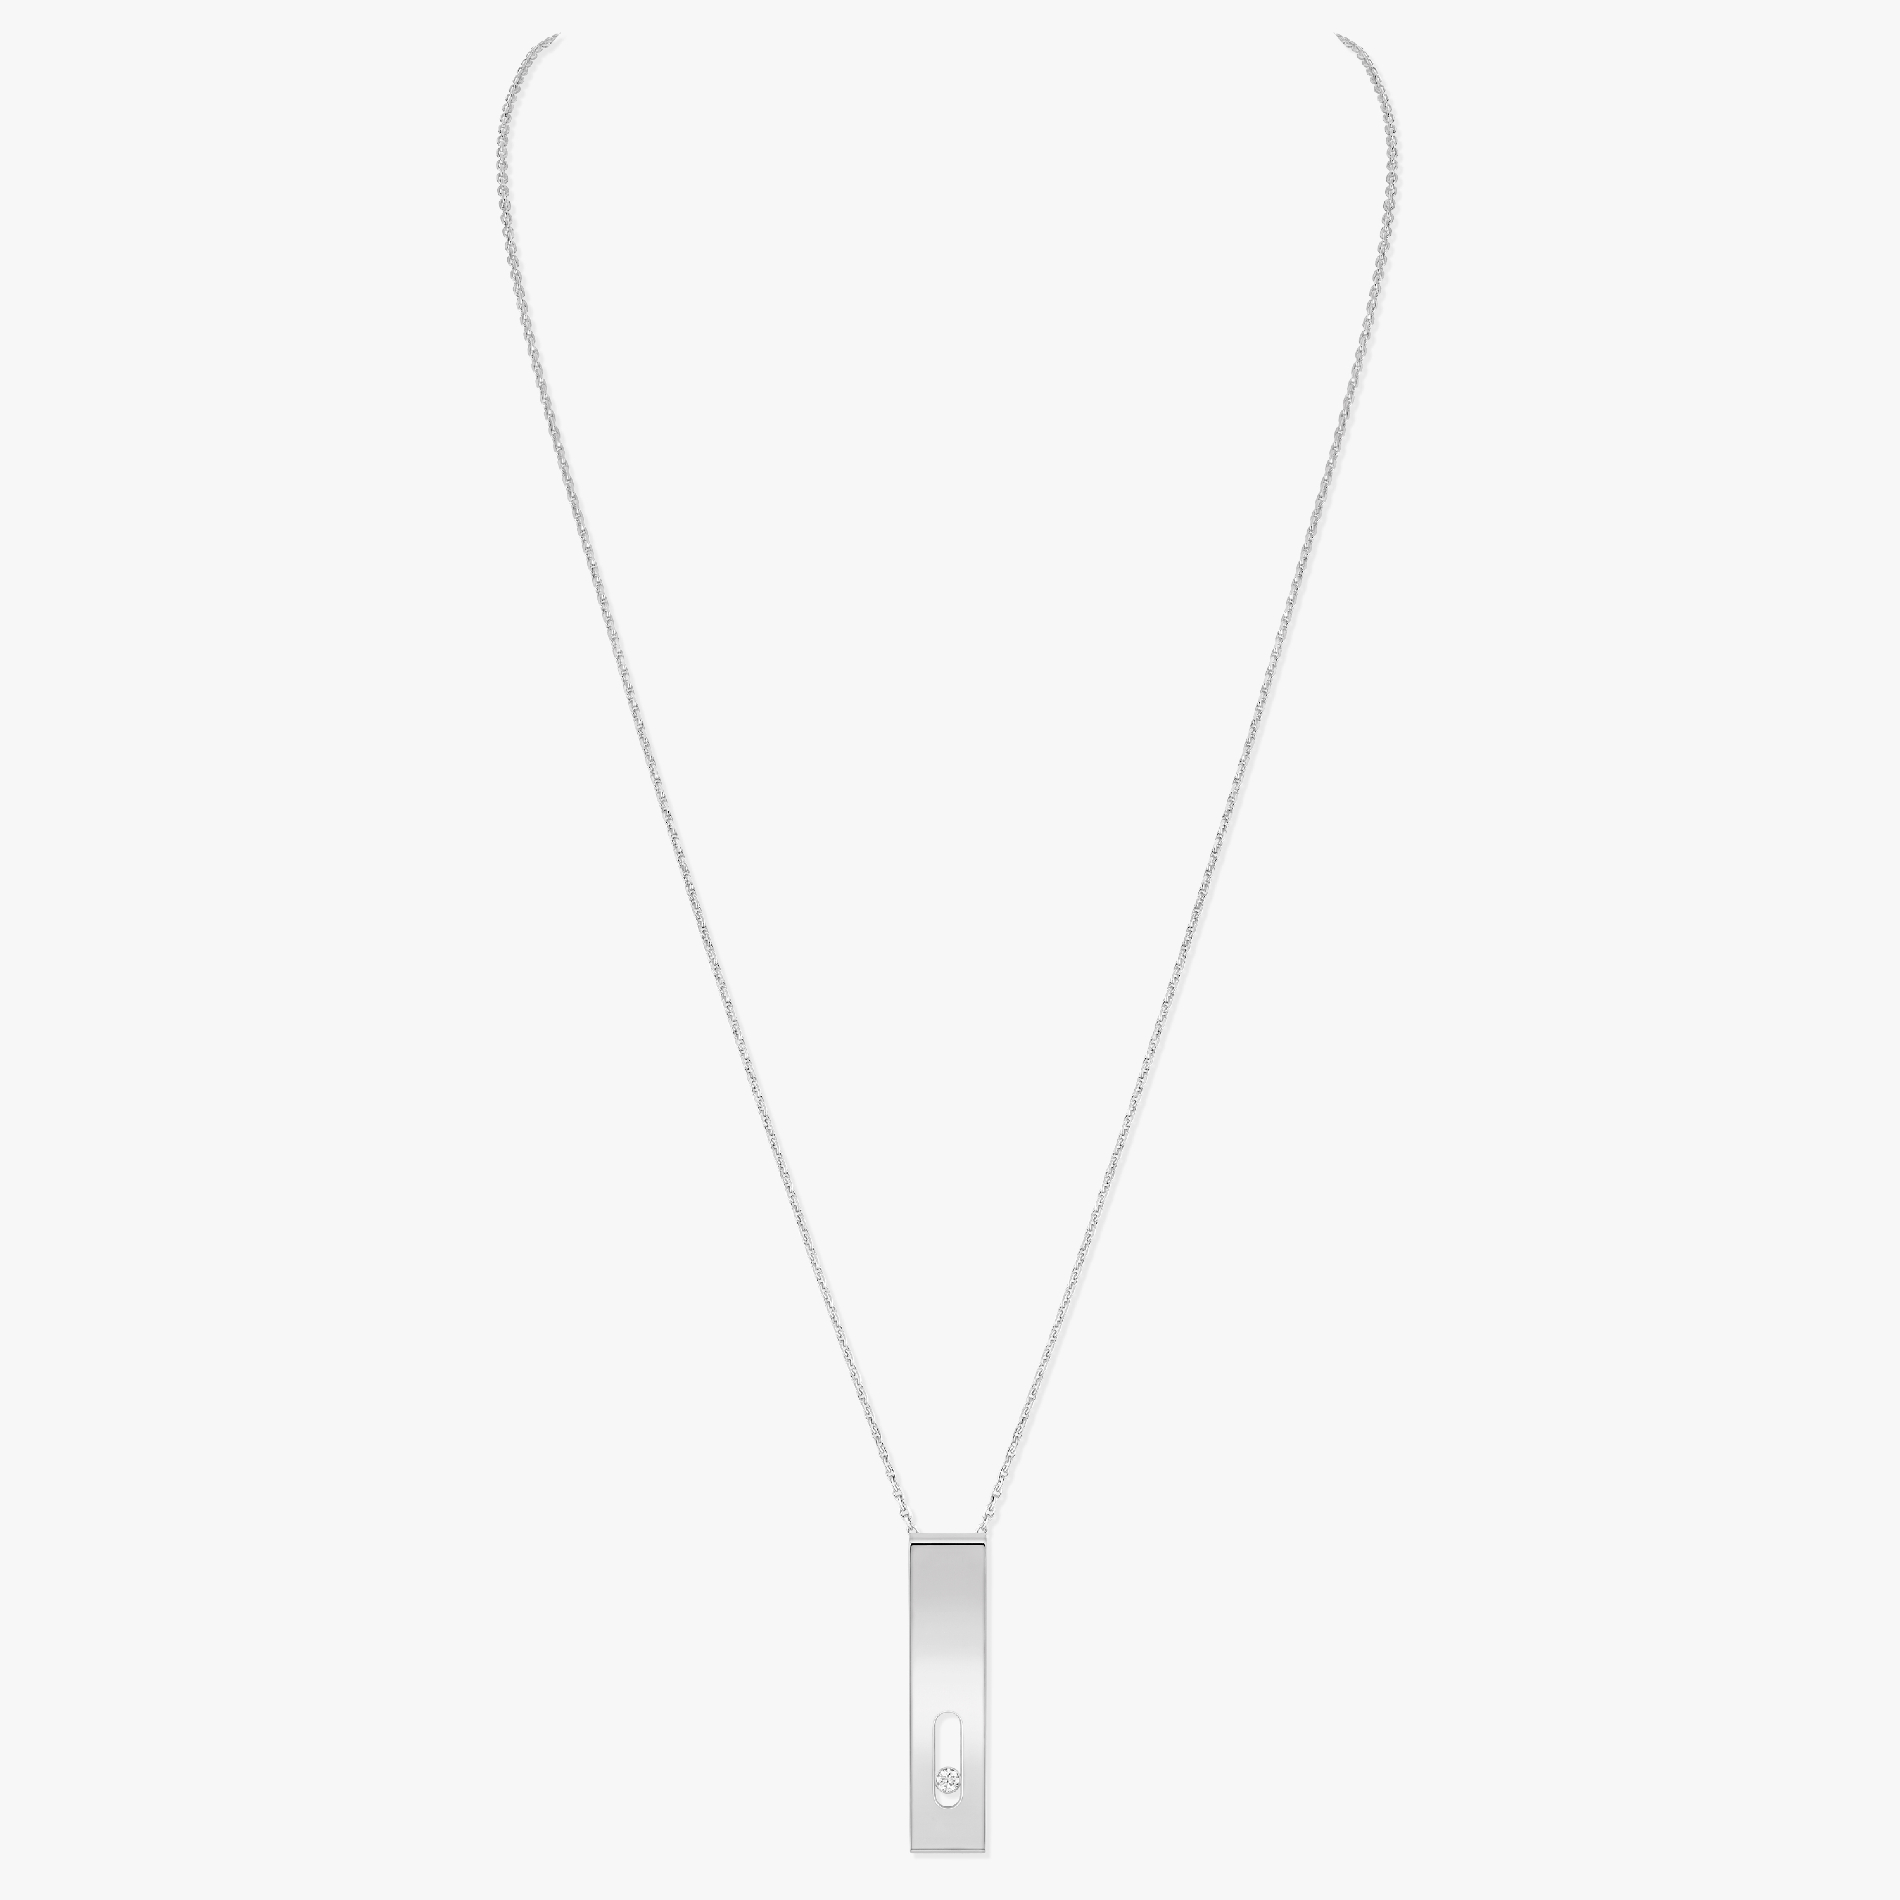 Collier Mixte Or Blanc Diamant Long Move Joaillerie 11700-WG